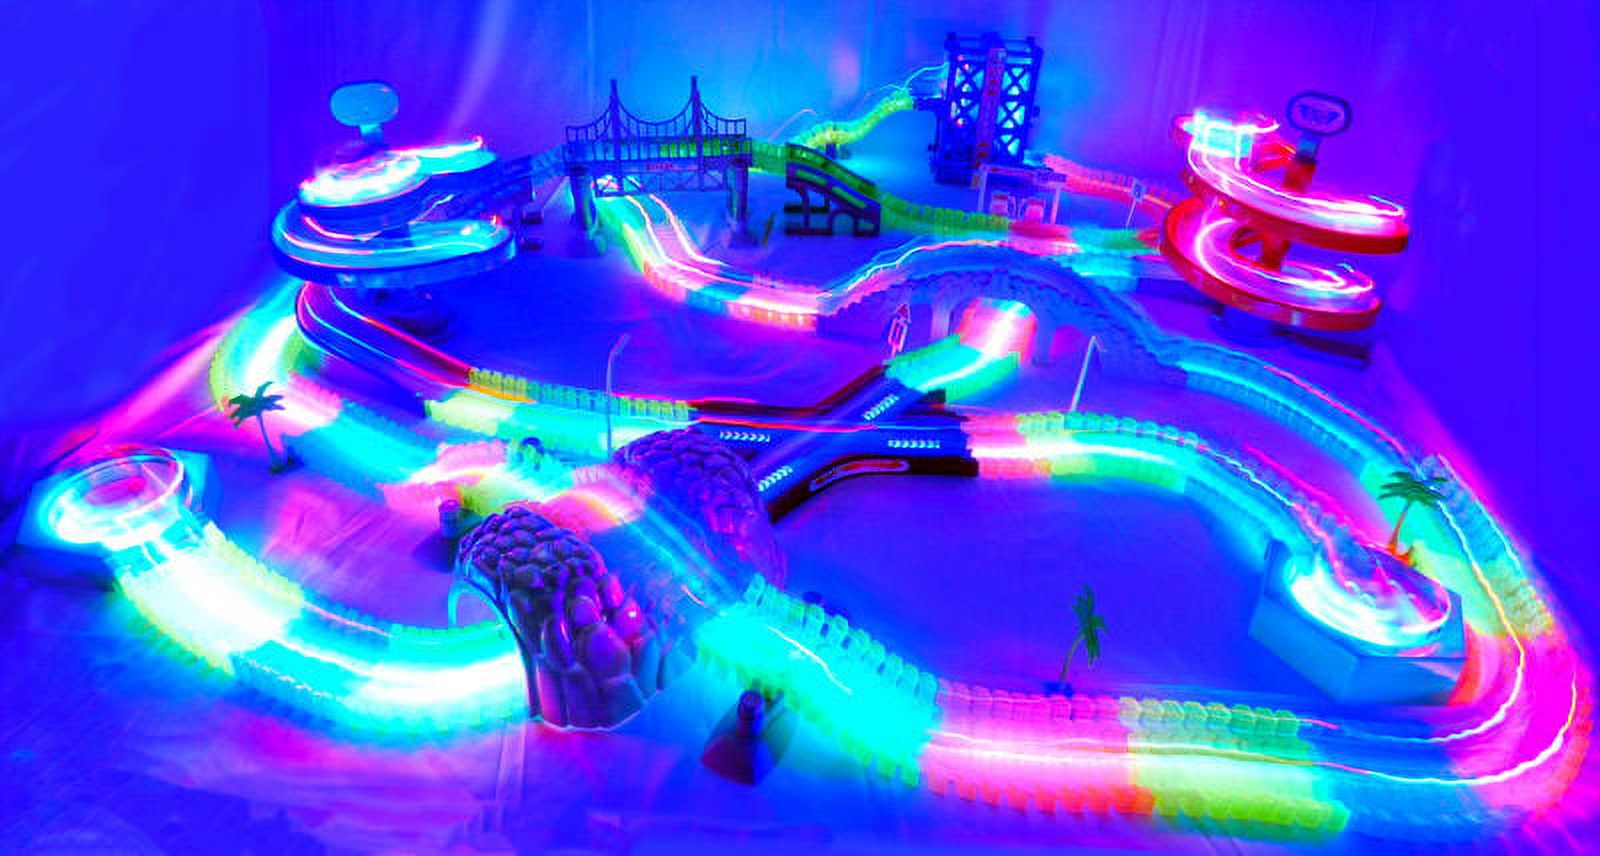 Magical Light Up Twisting Glow In The Dark Race Tracks - Magical Twister Race Track Toy Cars - Endless Glowing Track Possibilities - image 5 of 7